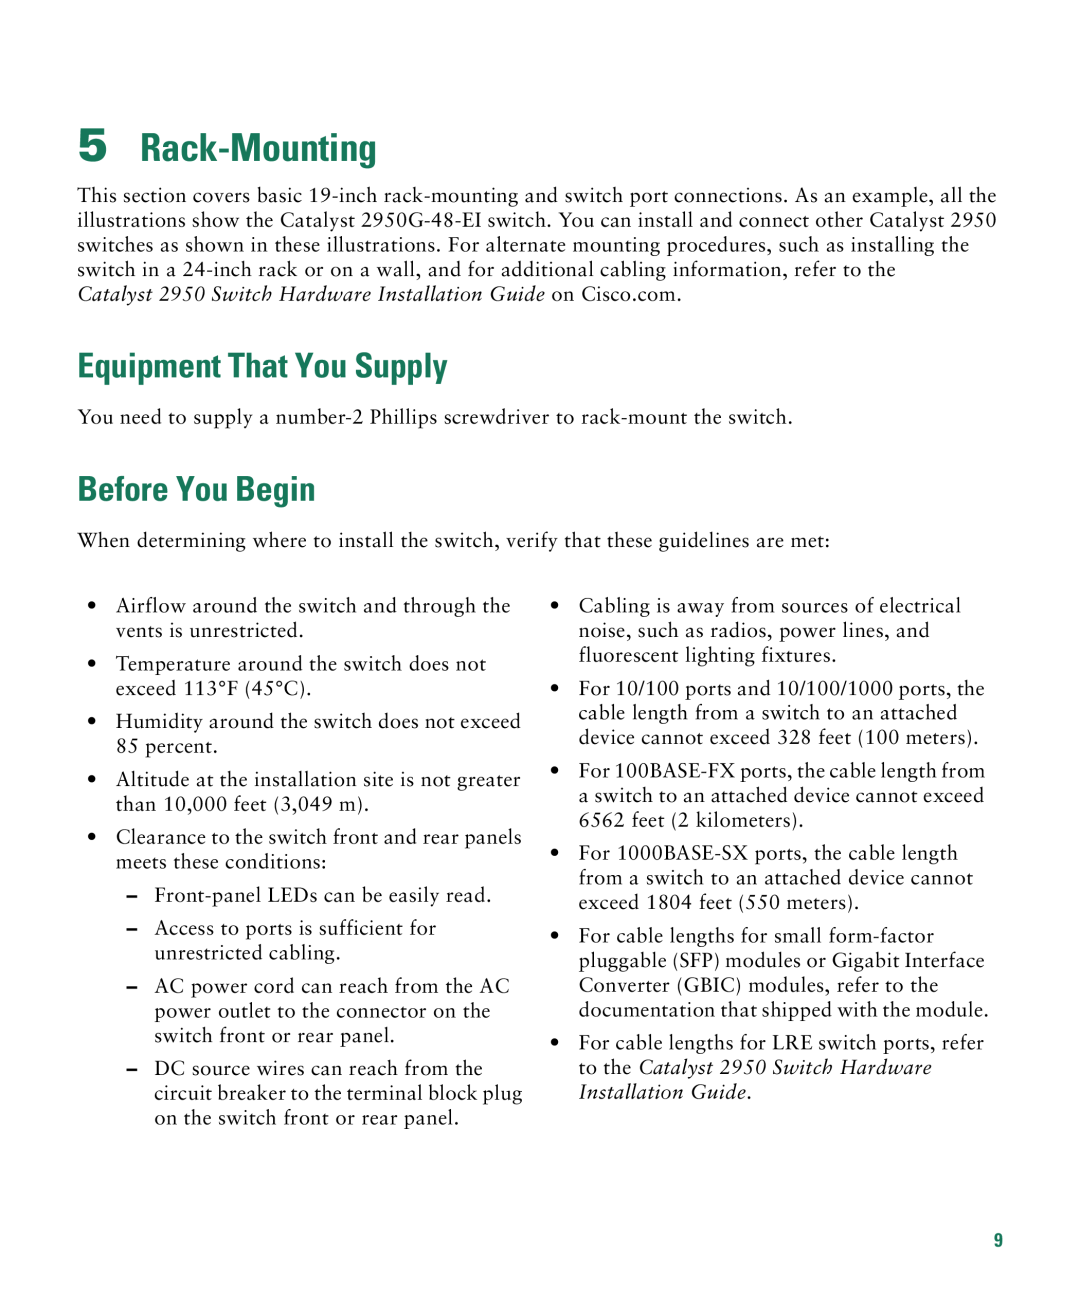 Cisco Systems CATALYST 2950 manual Rack-Mounting, Equipment That You Supply, Before You Begin 